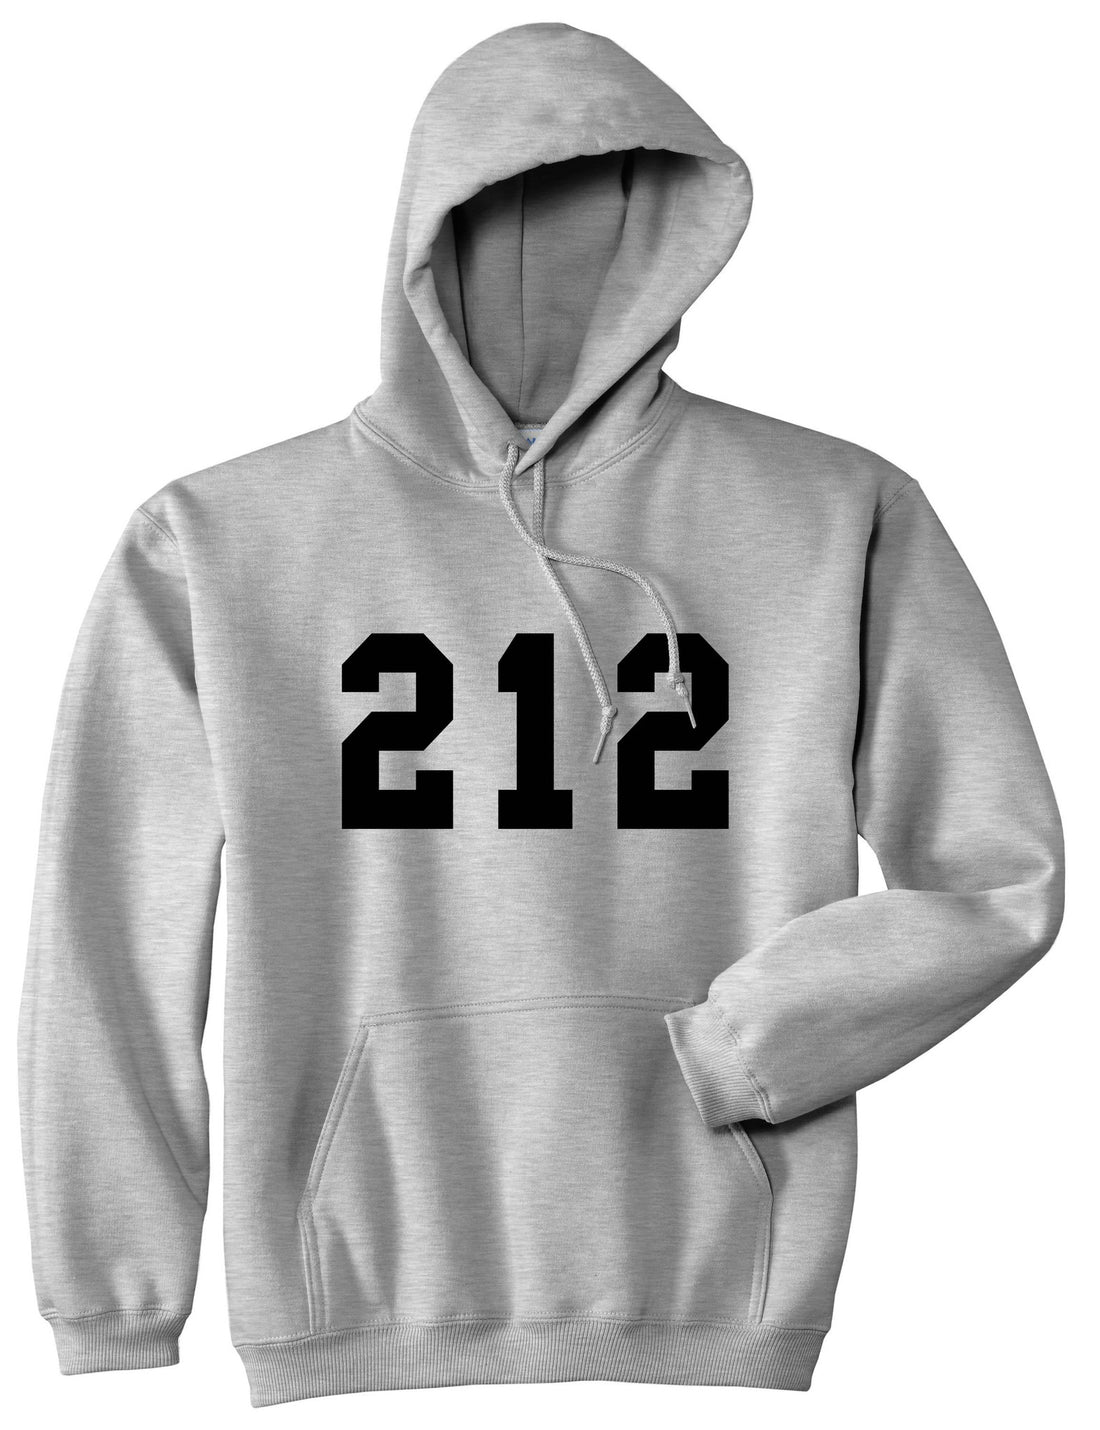 212 New York Area Code Pullover Hoodie in Grey By Kings Of NY